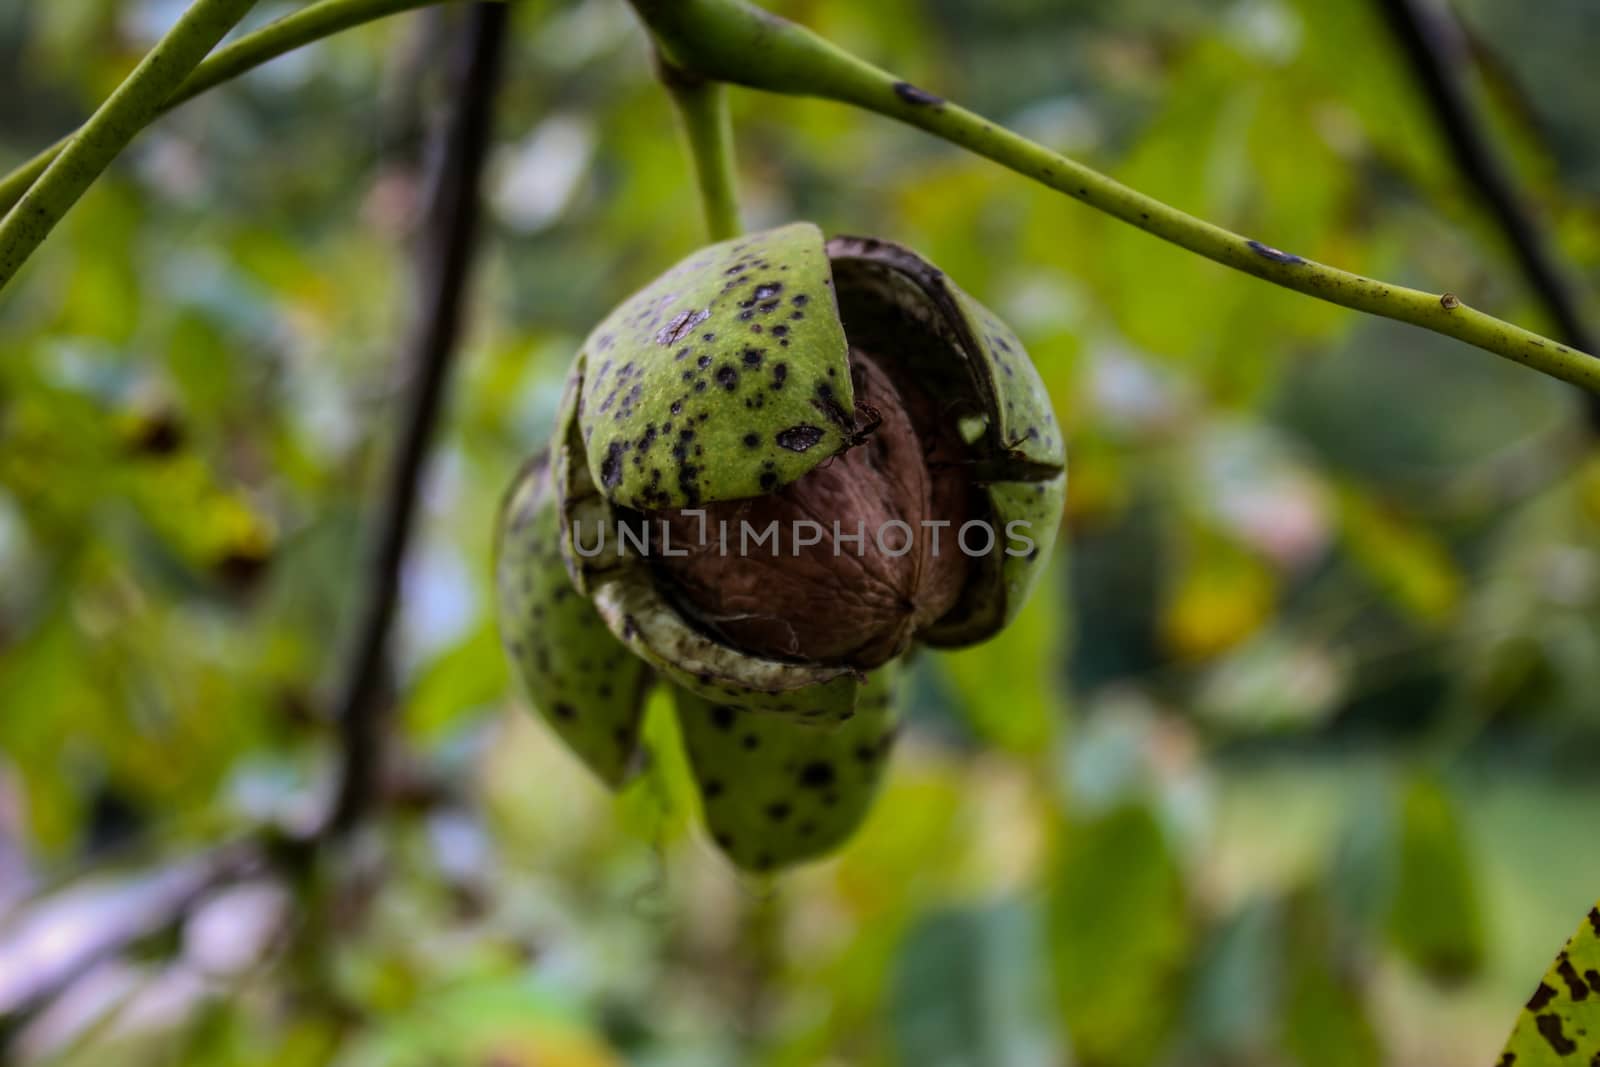 A cracked green shell from which a walnut can be seen. Walnut on a branch. Zavidovici, Bosnia and Herzegovina.